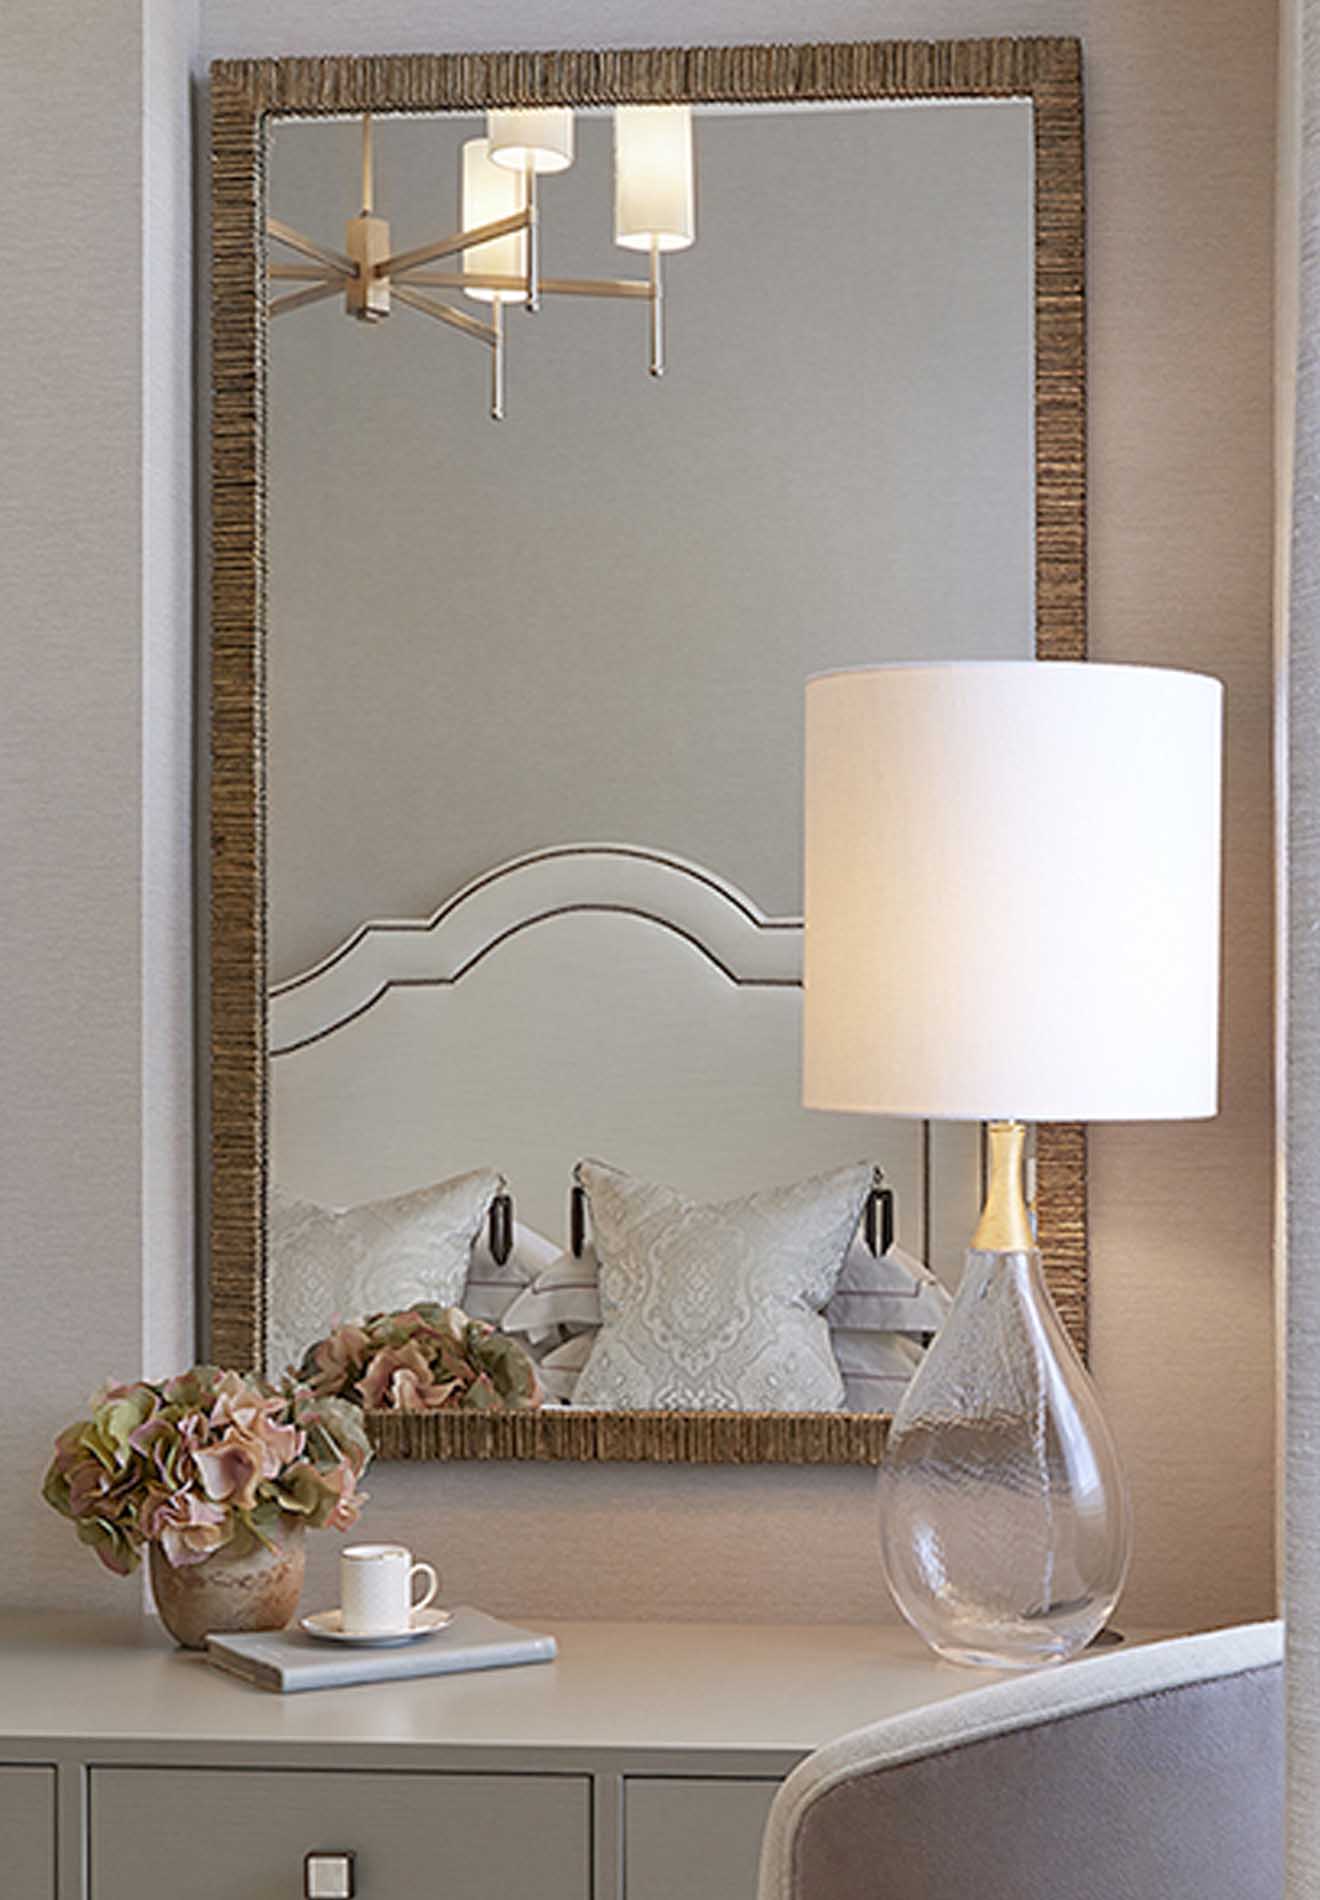 Porta Romana Trevose mirror featured in Sophie Paterson's Interior, photography by Ray Main